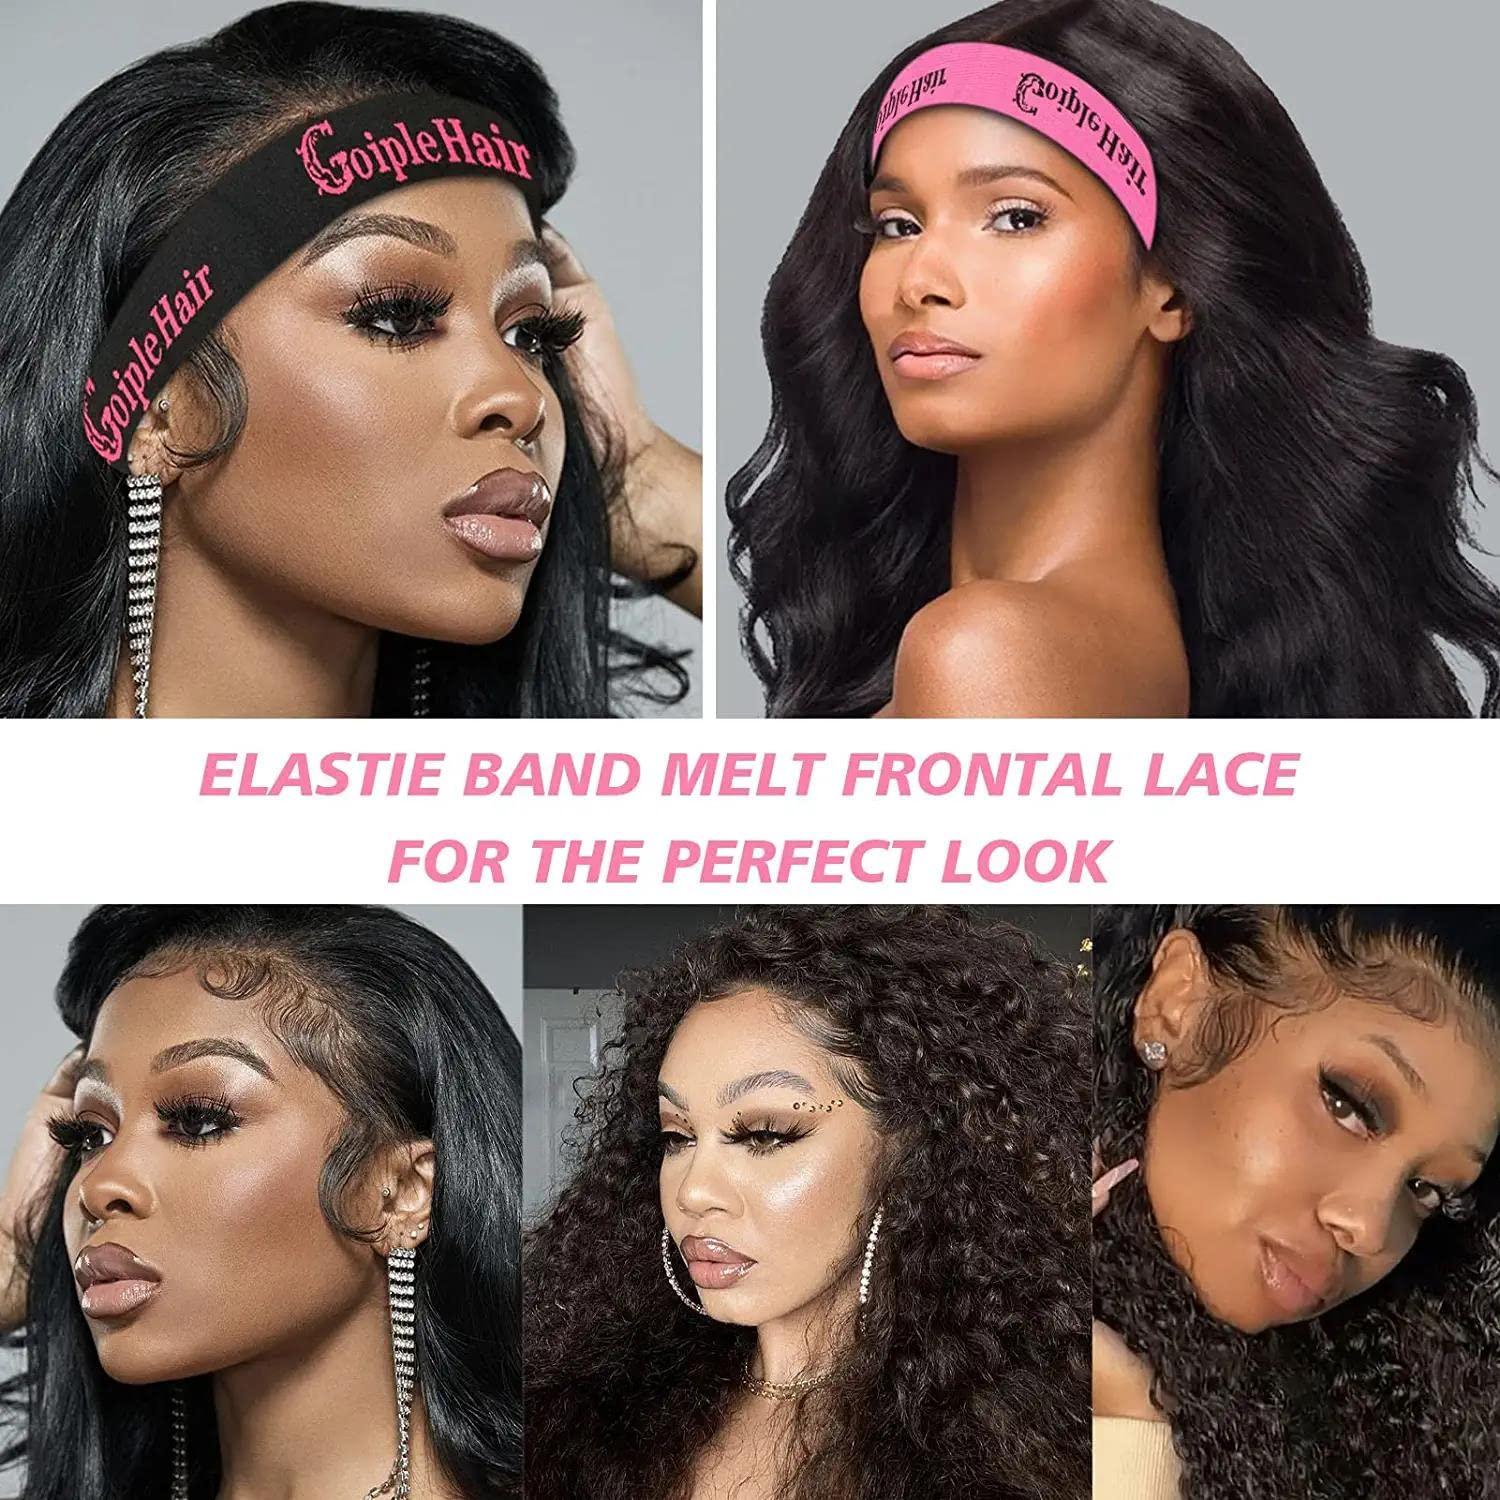 Goiple 3PCS Elastic Bands for Wig Edges - Elastic Band for Lace Frontal  Melt Wig